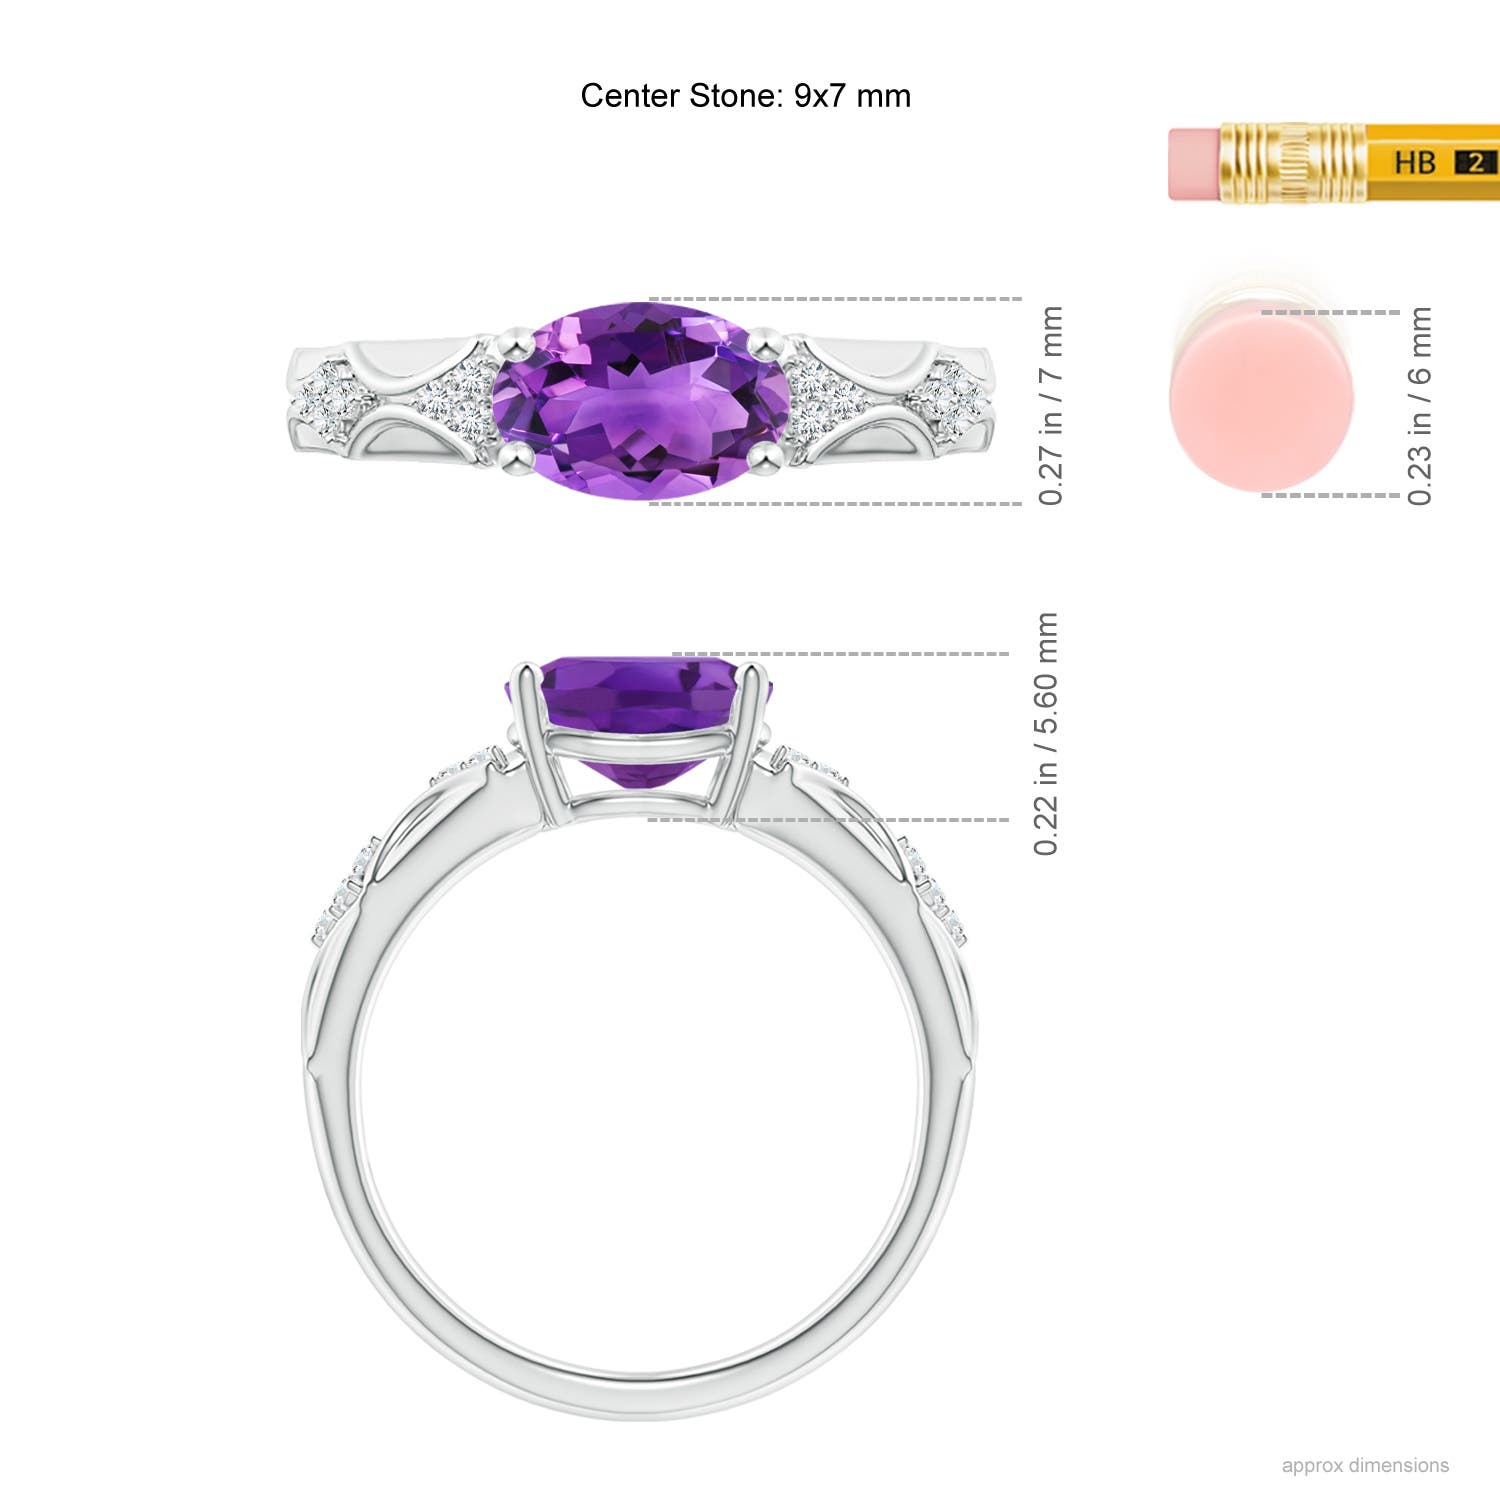 AAA - Amethyst / 1.68 CT / 14 KT White Gold